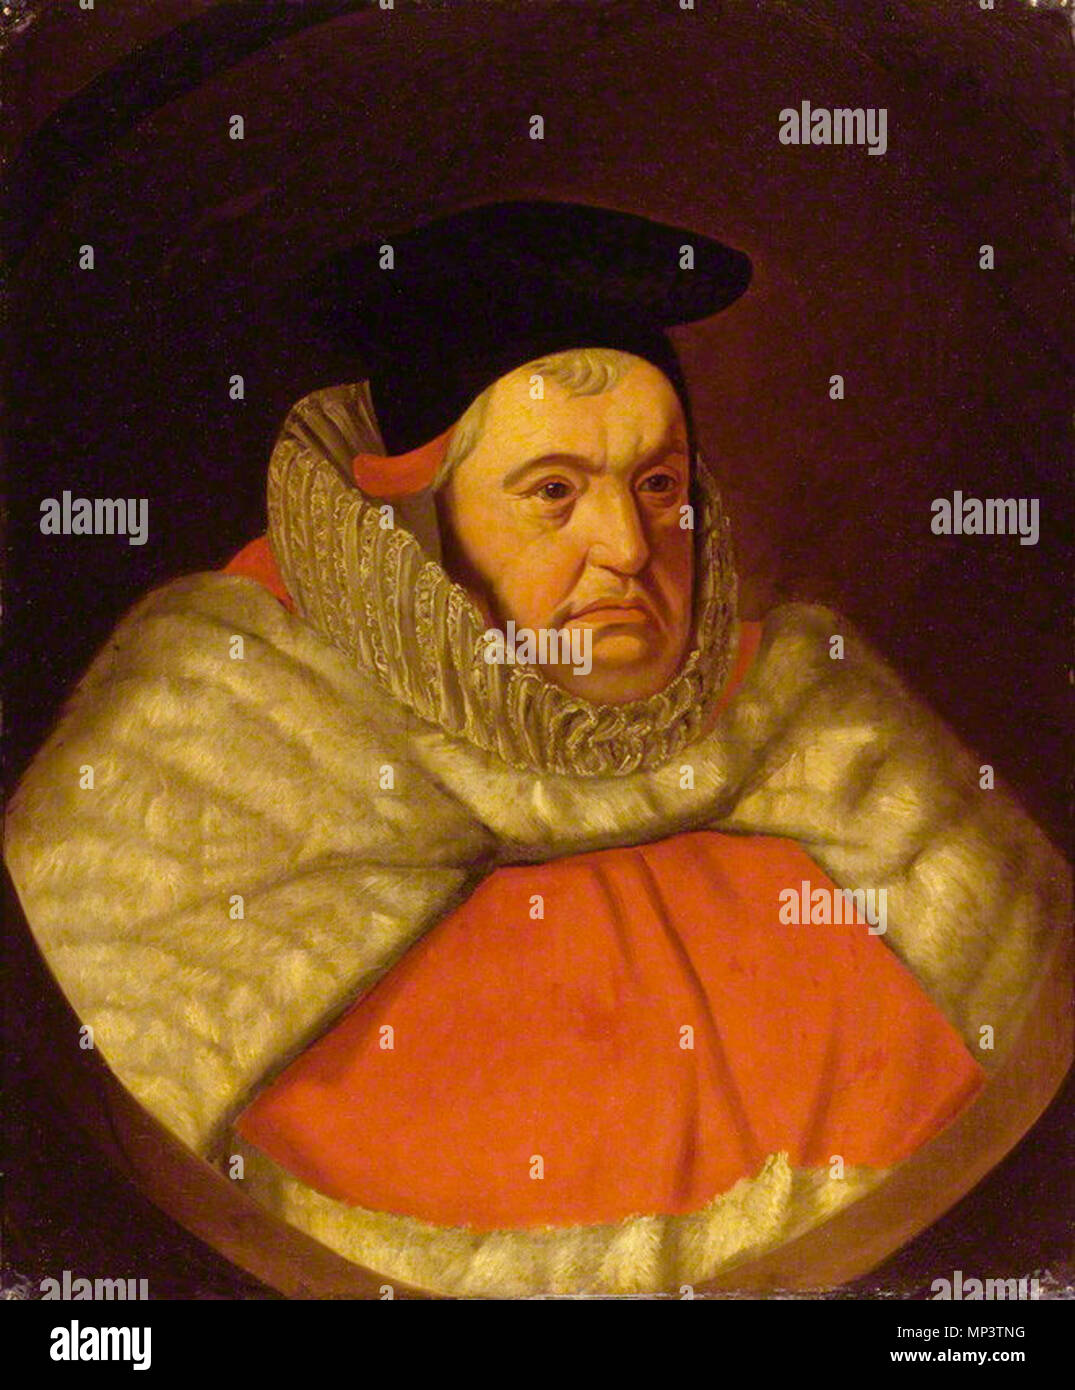 by Unknown artist, oil on canvas, feigned oval, probably late 17th century   English: Sir John Doddridge (or Doderidge).  English: A painted portrait of Sir John Doddridge (1555–1628), an English lawyer who was appointed Justice of the King's Bench in 1612 and served as Member of Parliament for Barnstaple in 1589 and for Horsham in 1604. (The oval shape of the portrait is feigned.) . probably late 17th century.   732 John Doddridge Stock Photo